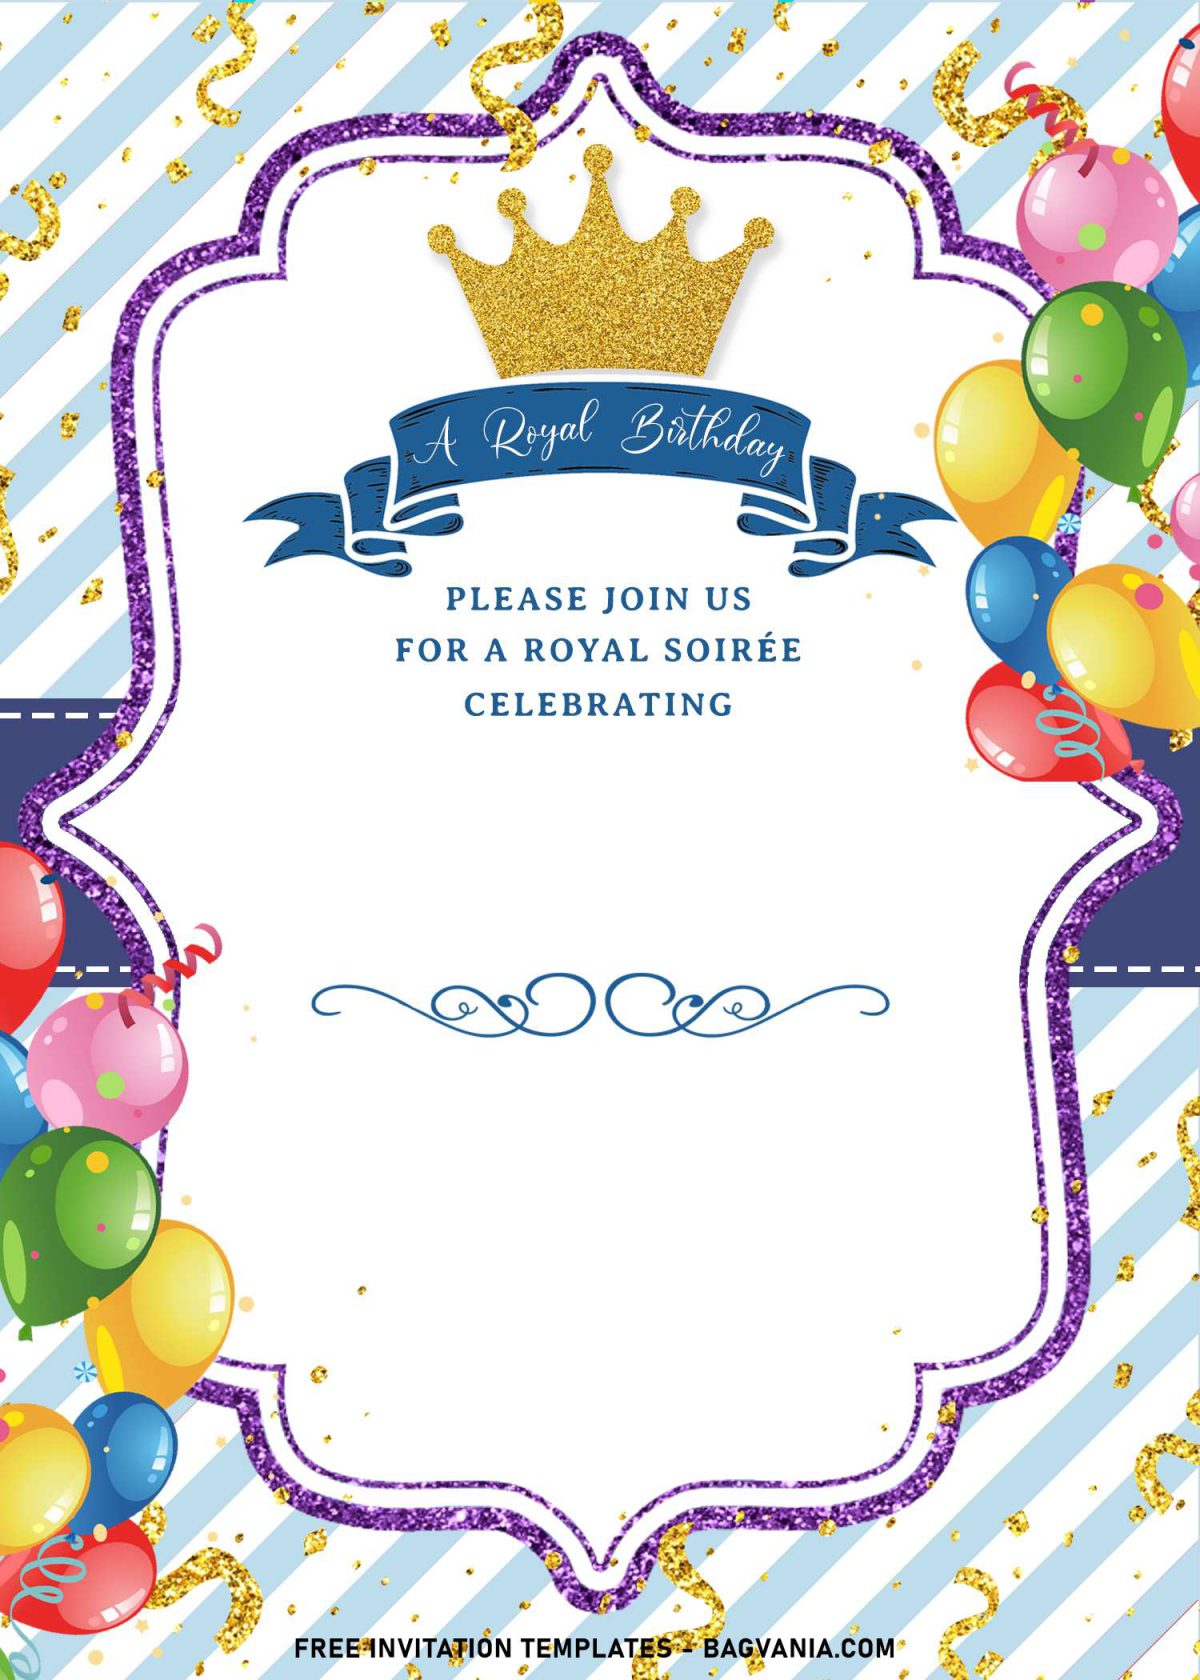 8+ Royal Birthday Invitation Templates For Your Kids Upcoming Birthday Party and has Gold Glitter Prince and Princess Crown